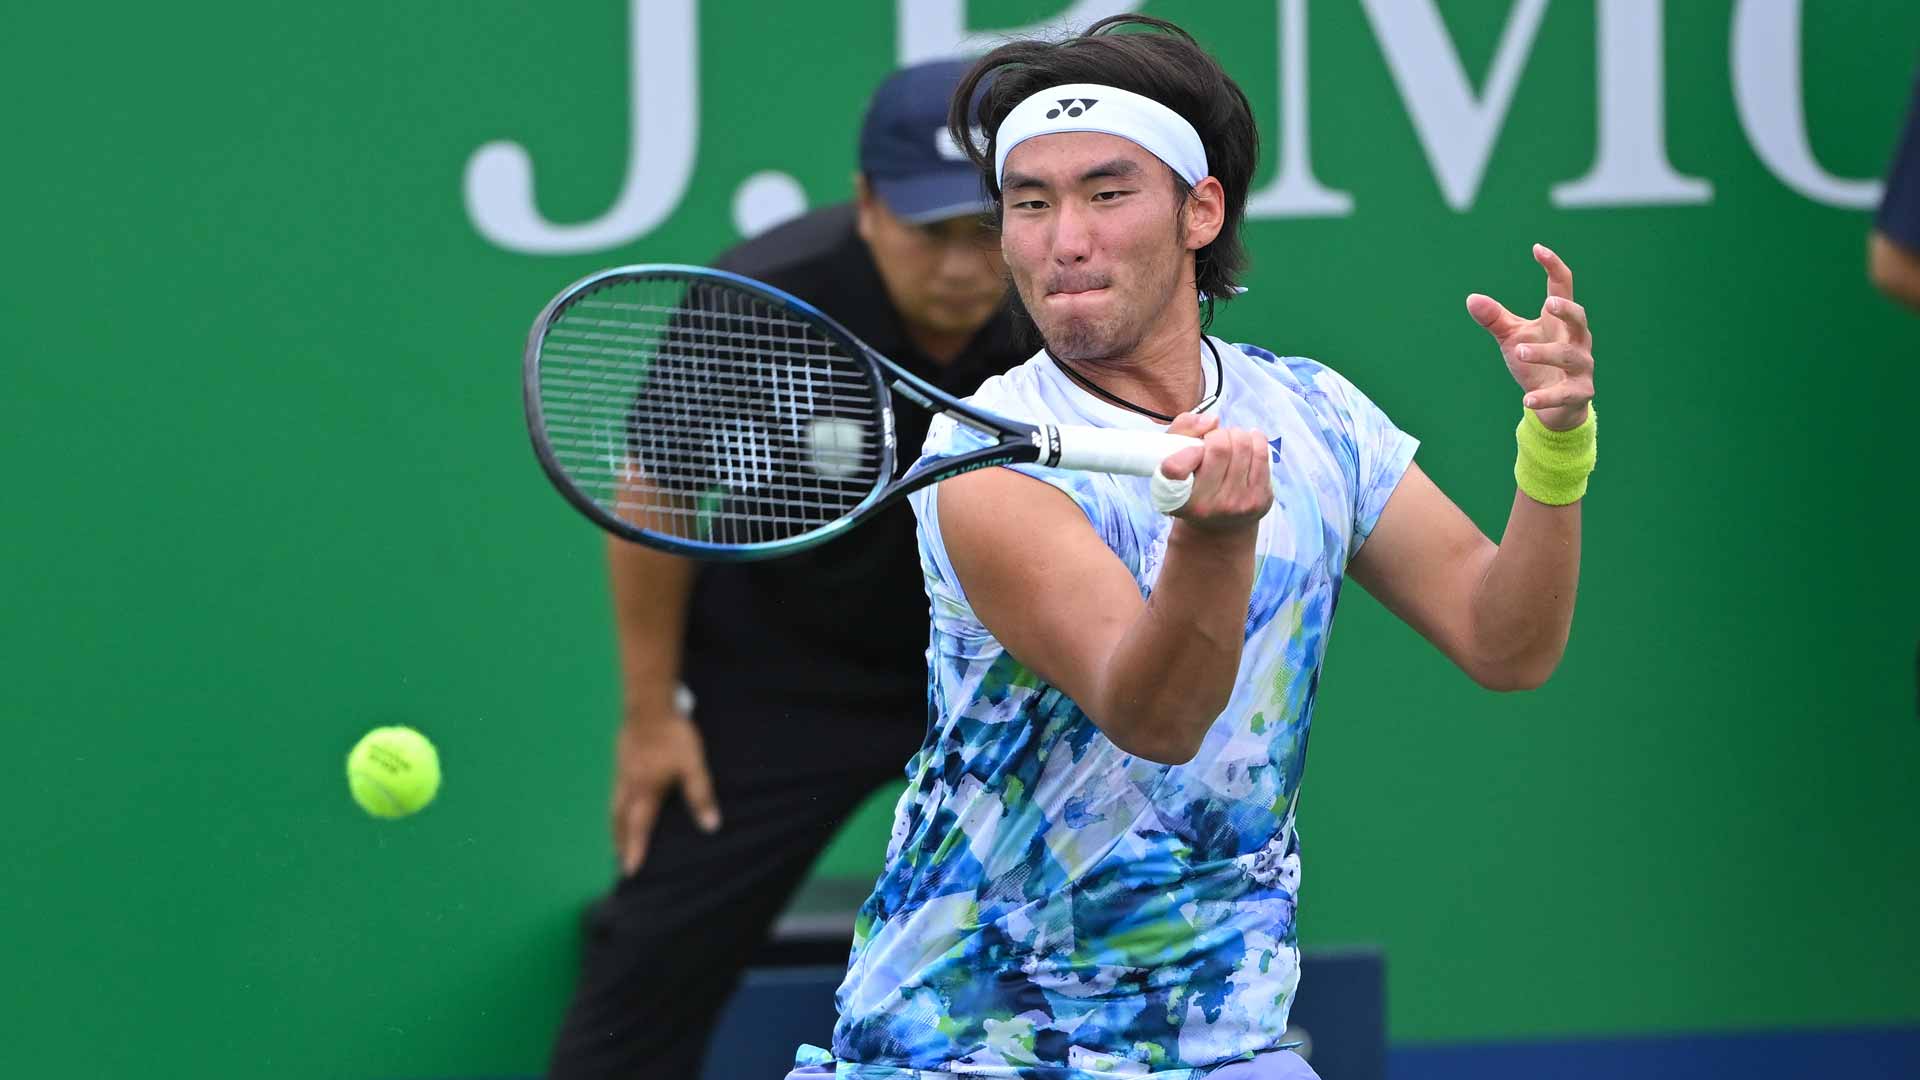 Buyunchaokete earns his maiden ATP Tour win at the <a href=